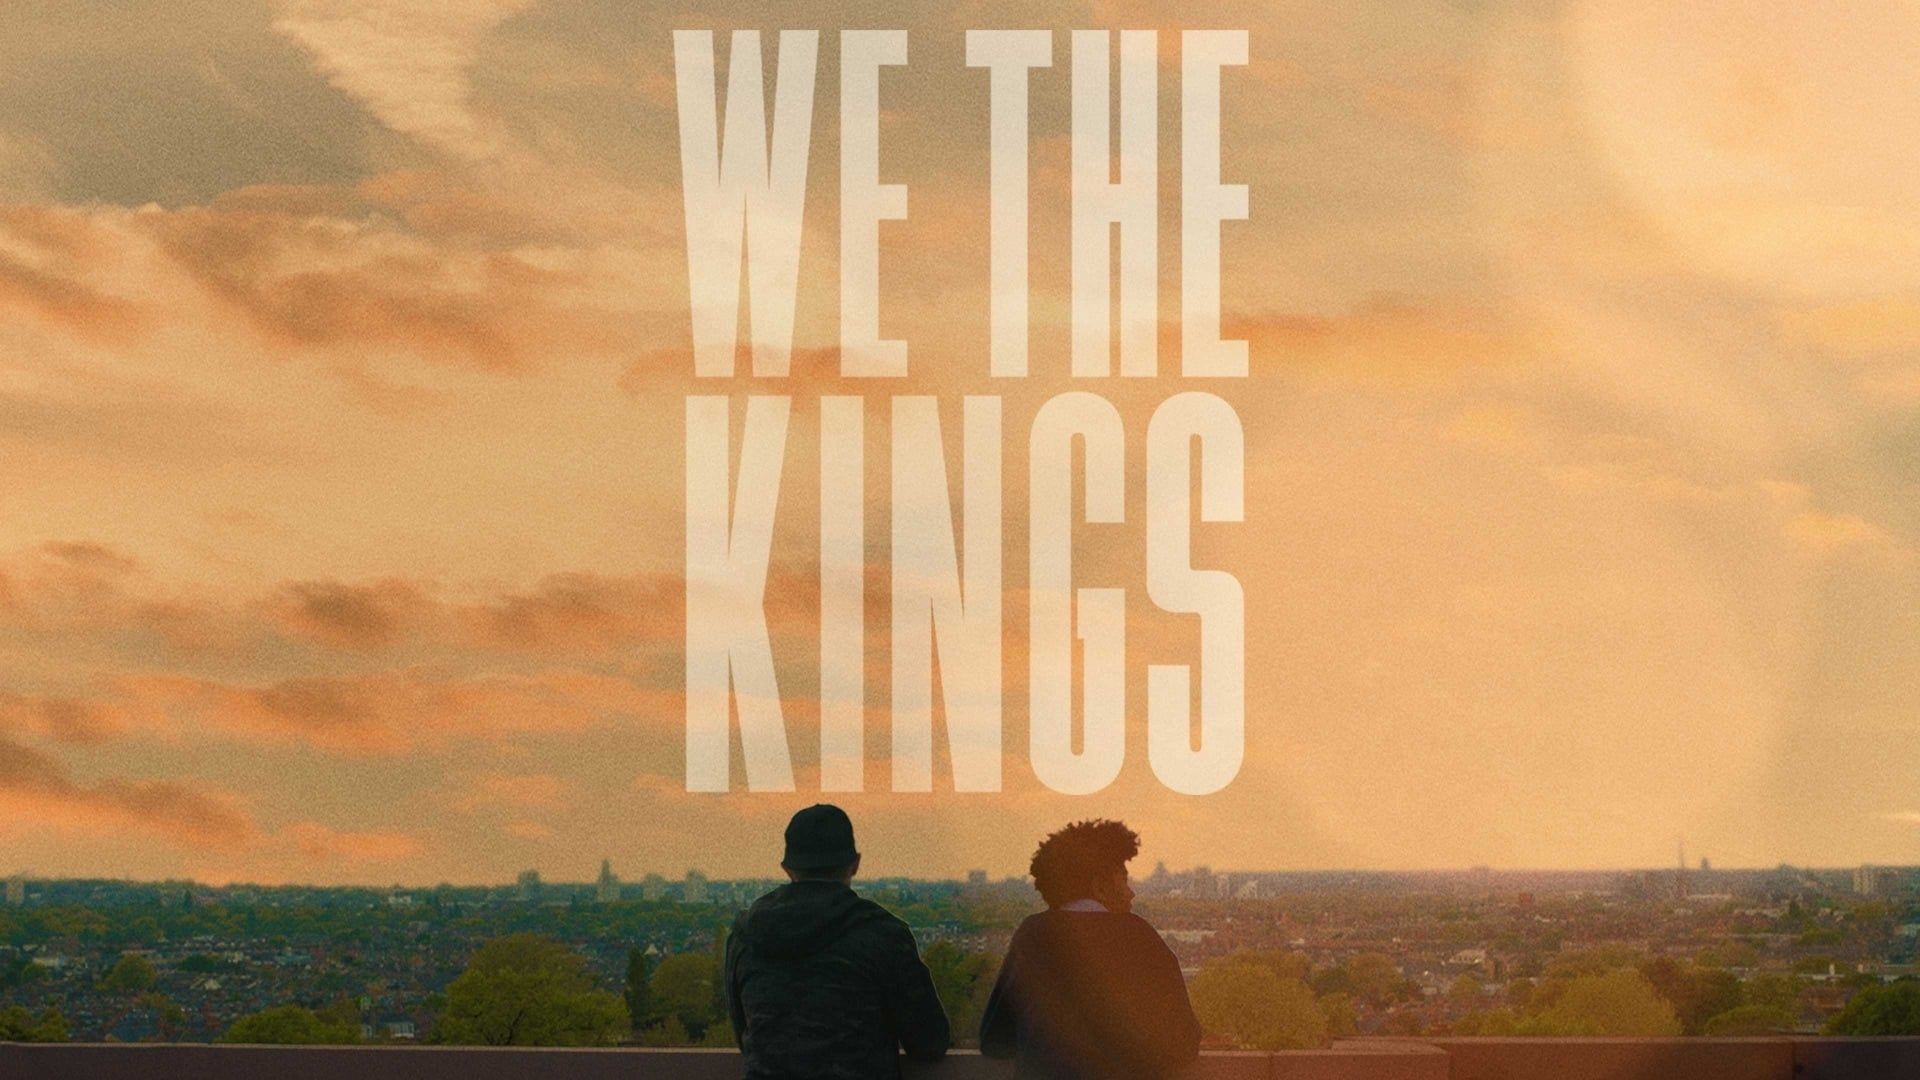 We the Kings background